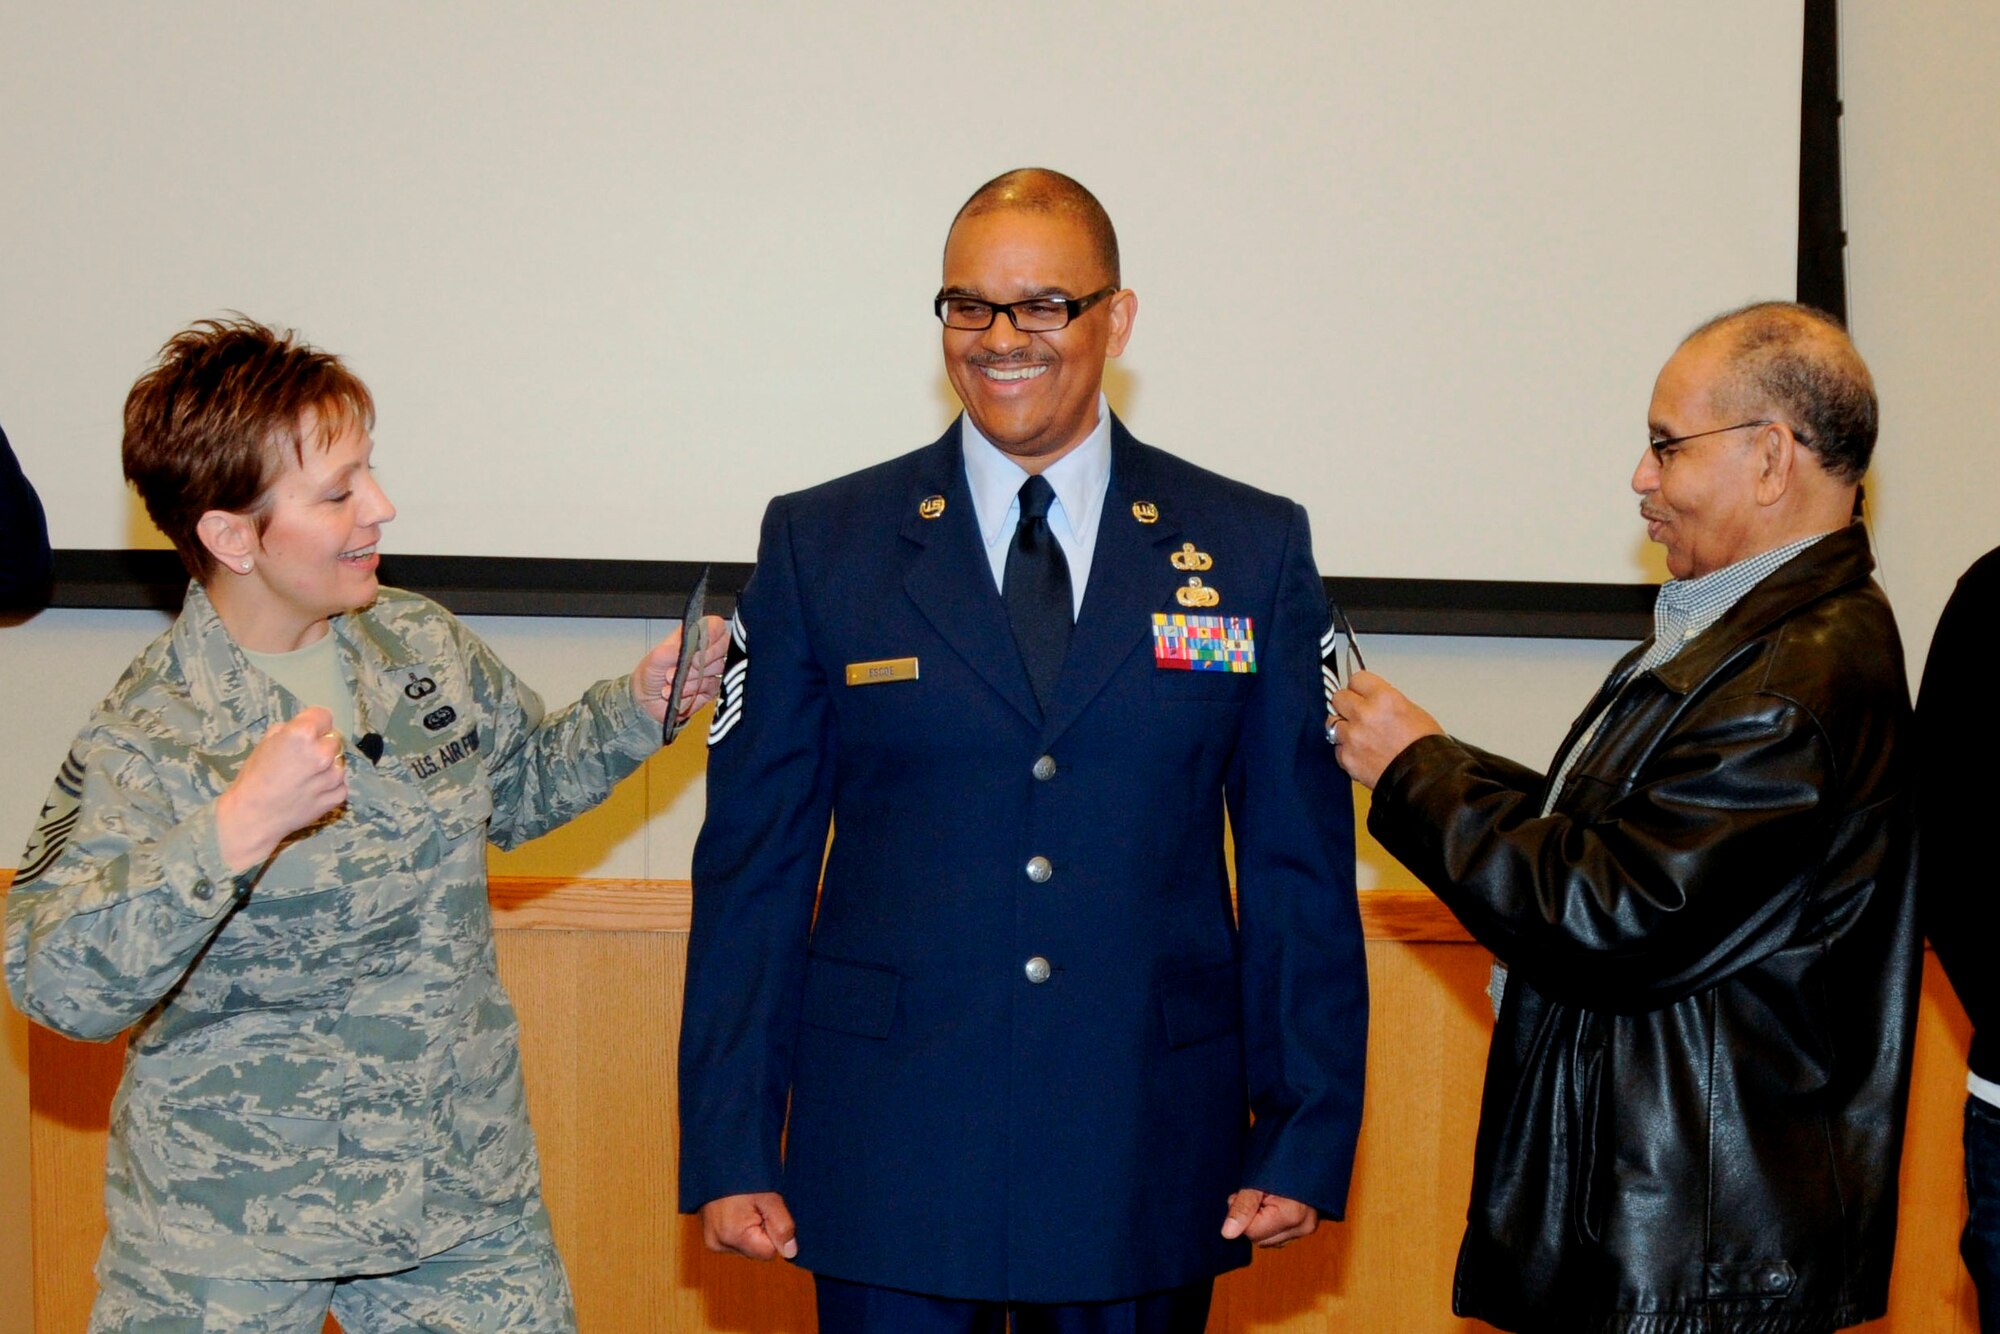 CMSgt. Denise Jelinski-Hall, senior enlisted leader of the National Guard Bureau, prepares to pin on the rank insignia of a chief master sergeant on to Walter Escoe, who was promoted to that rank during a Feb. 4, 2012 ceremony at Selfridge Air National Guard Base, Mich. New rank is traditionally “pinned” on to an Airman with a collegial punch in the arm. Pinning on the rank on the other arm Howard Goolsby, one of Escoe’s mentors. Jelinski-Hall visited Selfridge part of a tour of several Michigan National Guard facilities. At each stop, she spoke to Airmen and Soldiers and sought their input on issues to take back to the senior leaders of the Guard. (U.S. Air Force photo by TSgt. David Kujawa)